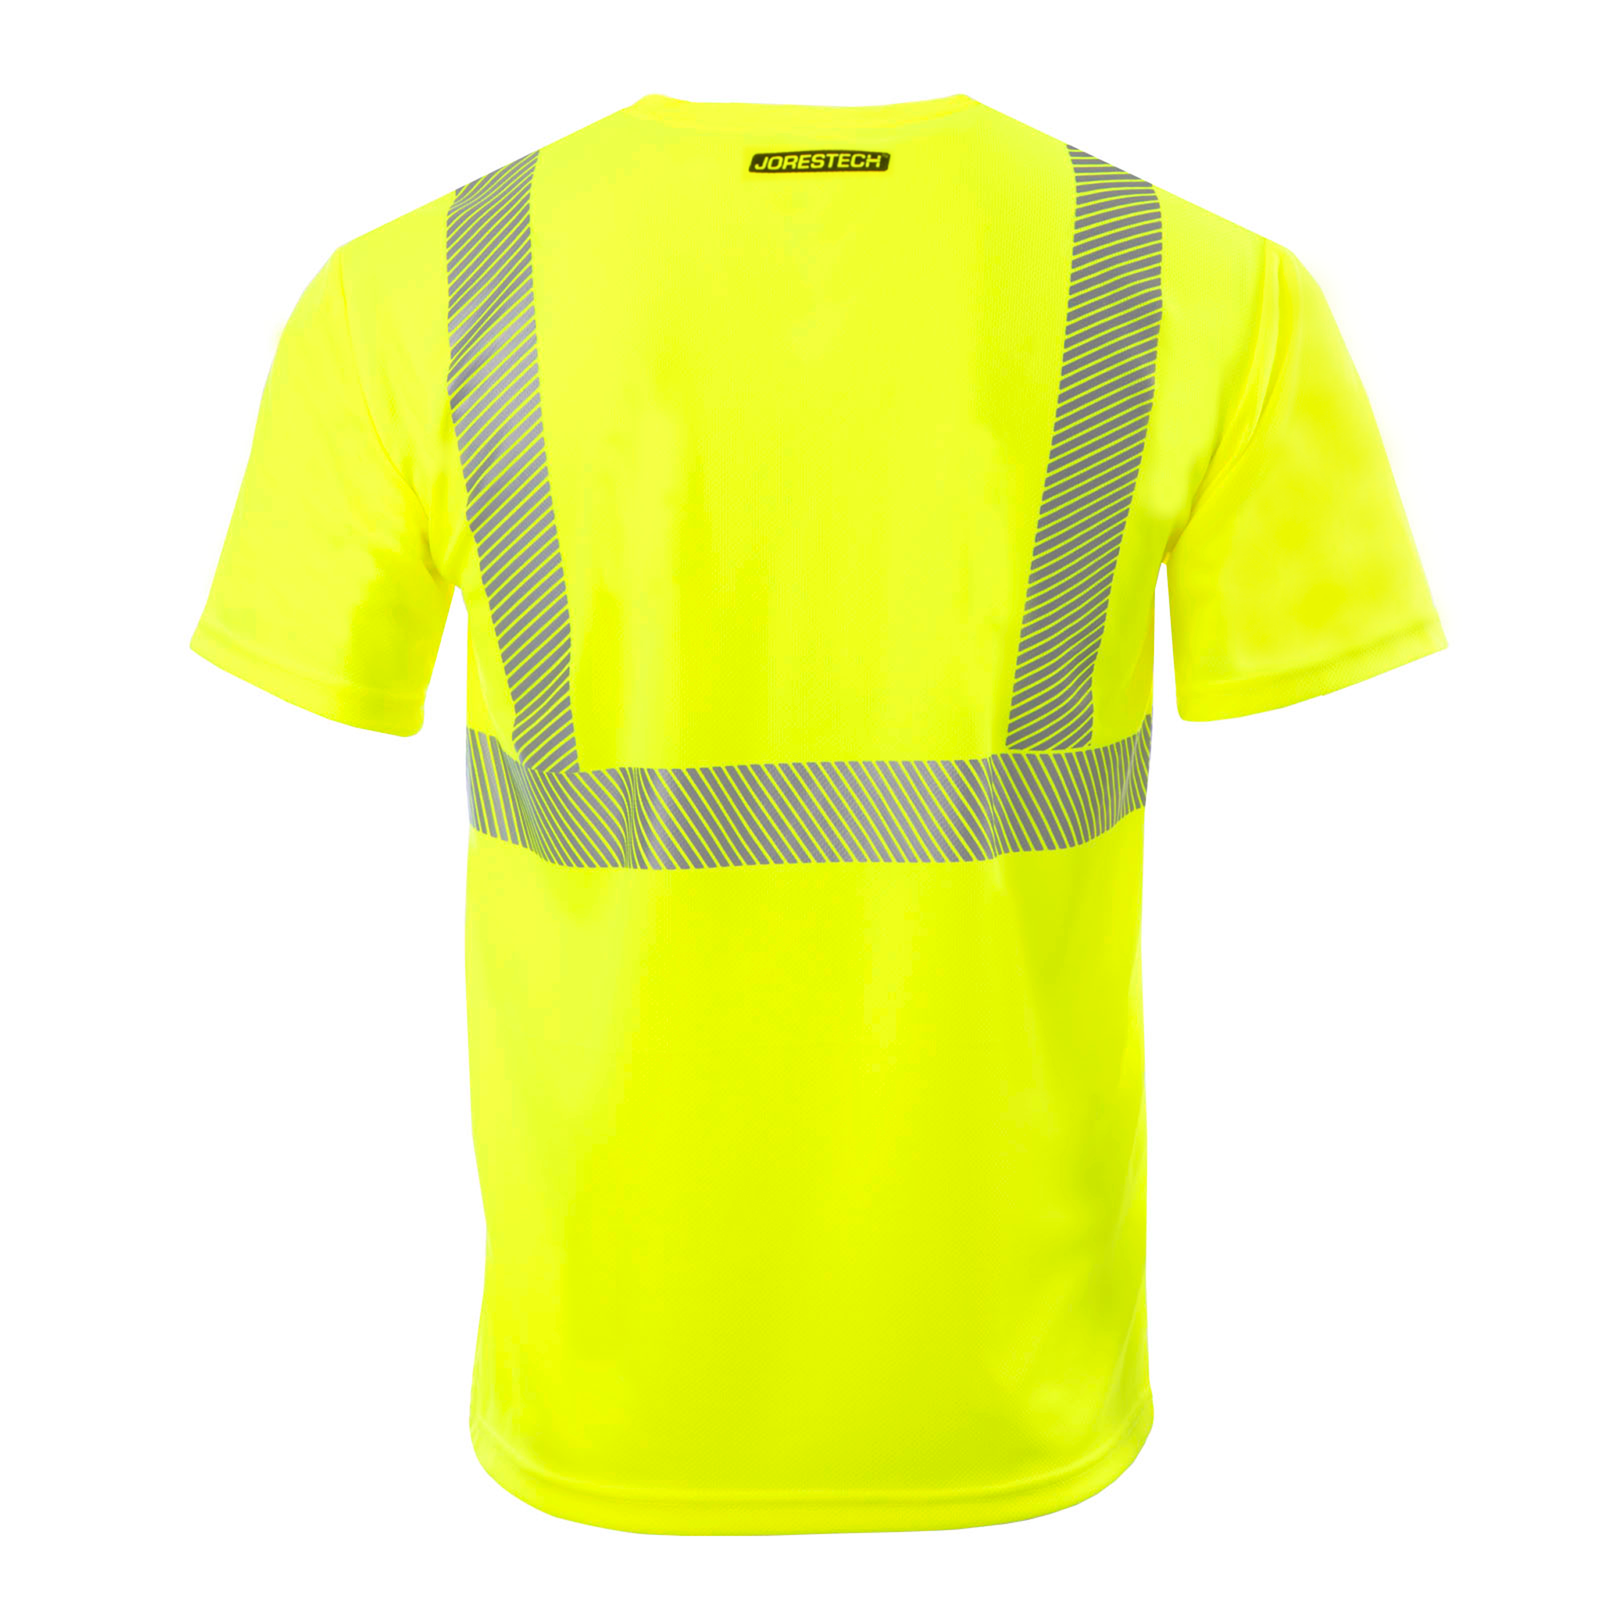 Back of the Hi-Vis Lime/Yellow heat transfer reflective safety pocket shirt